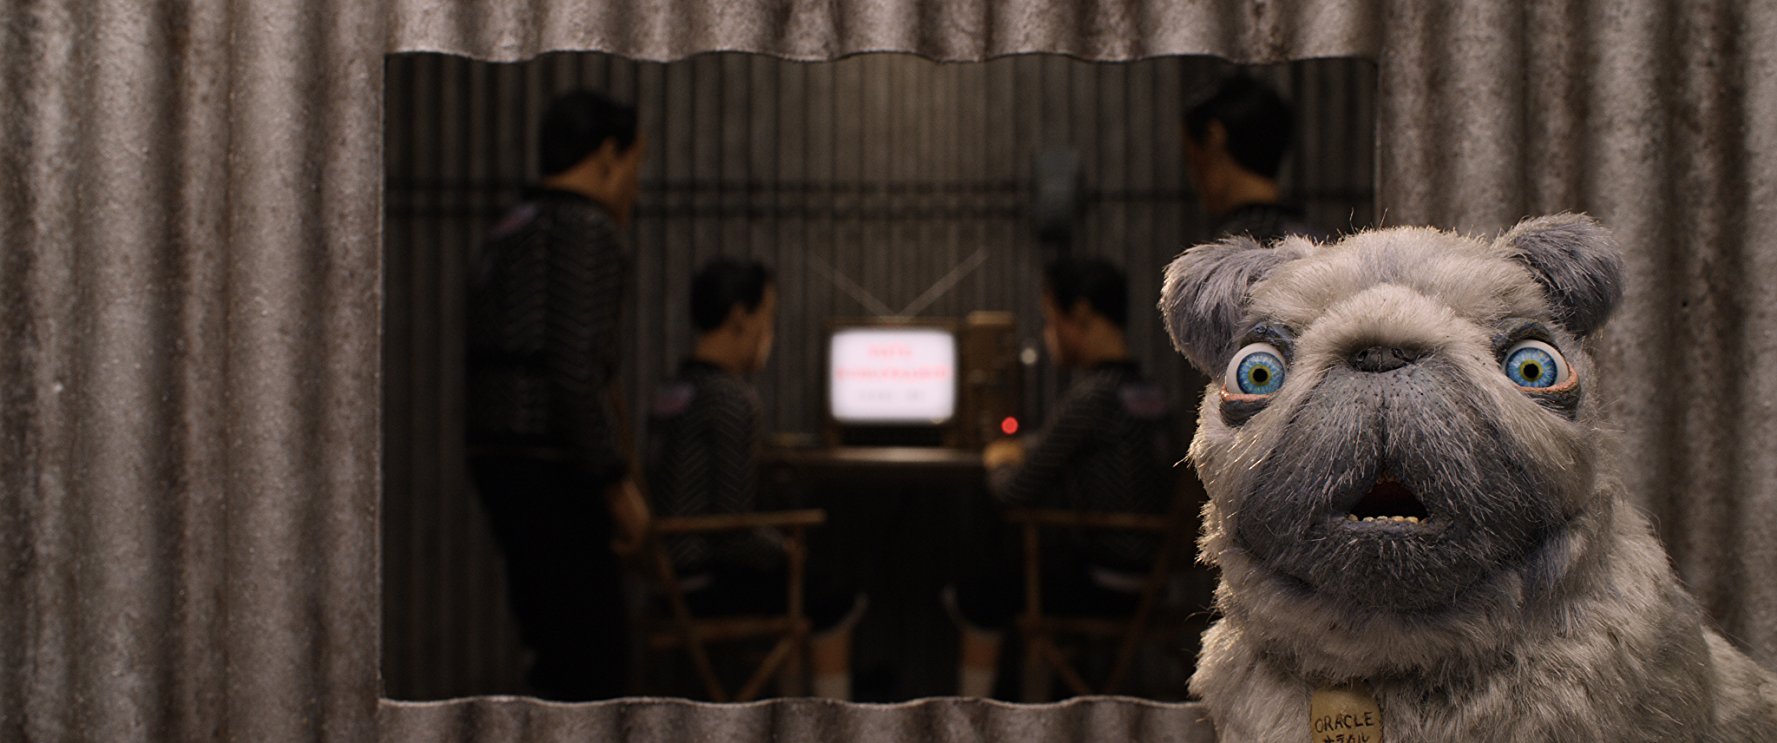 A pug voiced by Tilda Swinton is the focus of this frame, while Japanese characters are in the background.